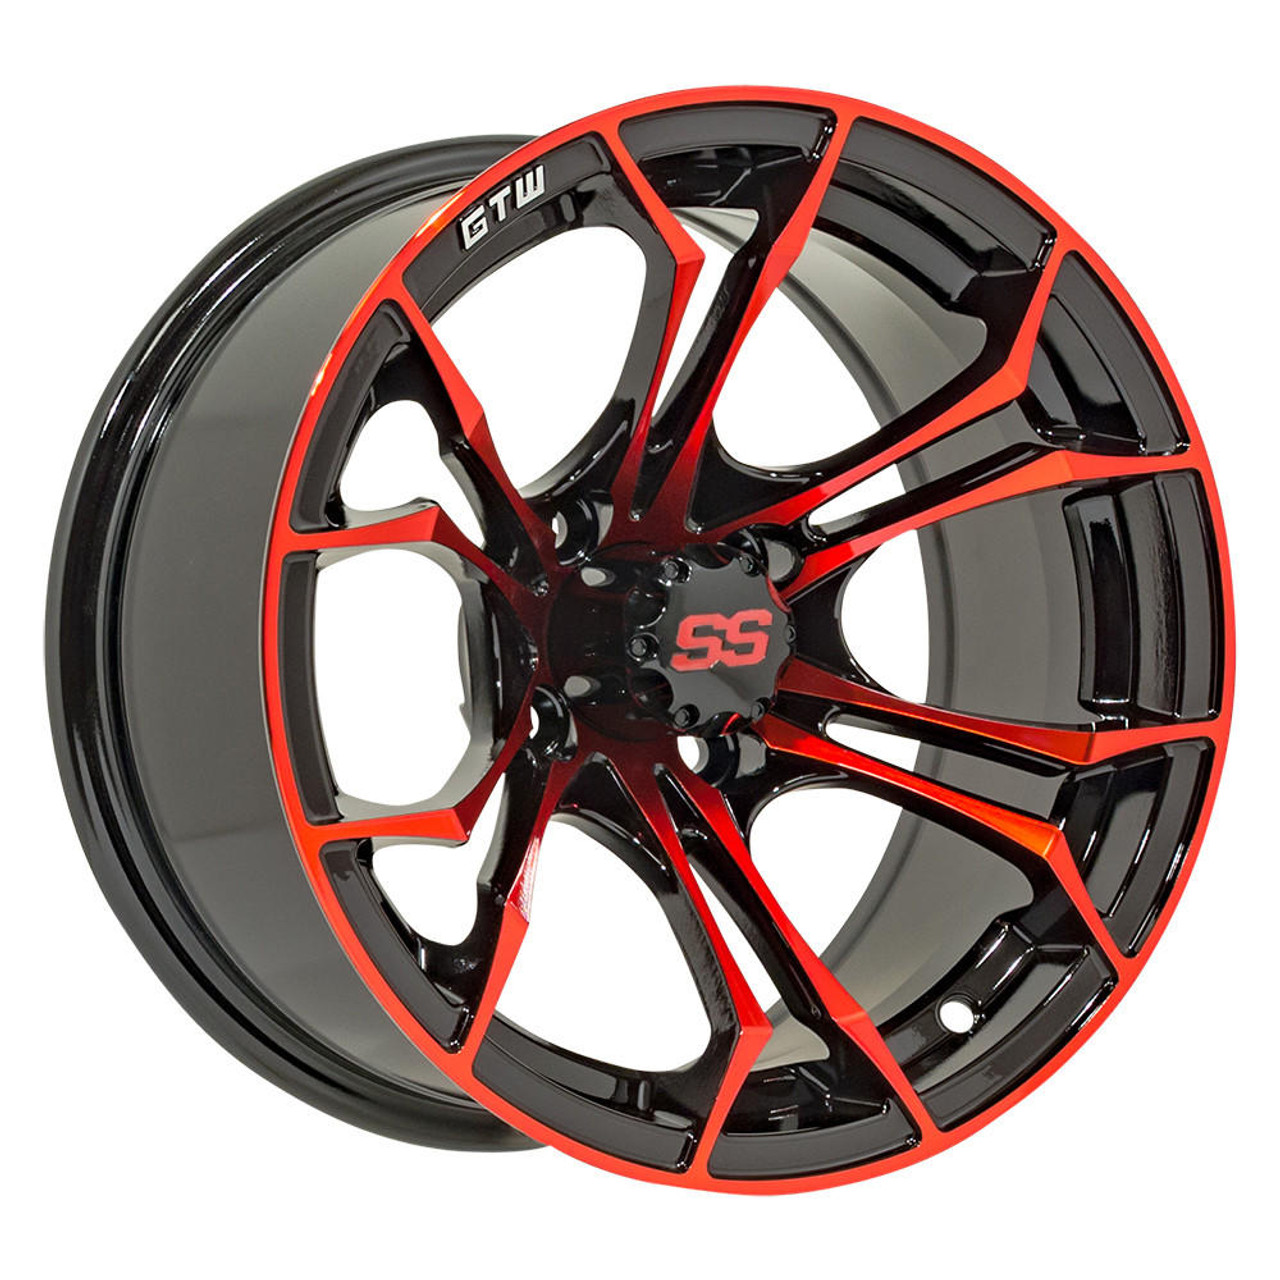  GTW 12" SPYDER Black/Red Wheels with Choice of Off-Road Tires (Set of 4) 